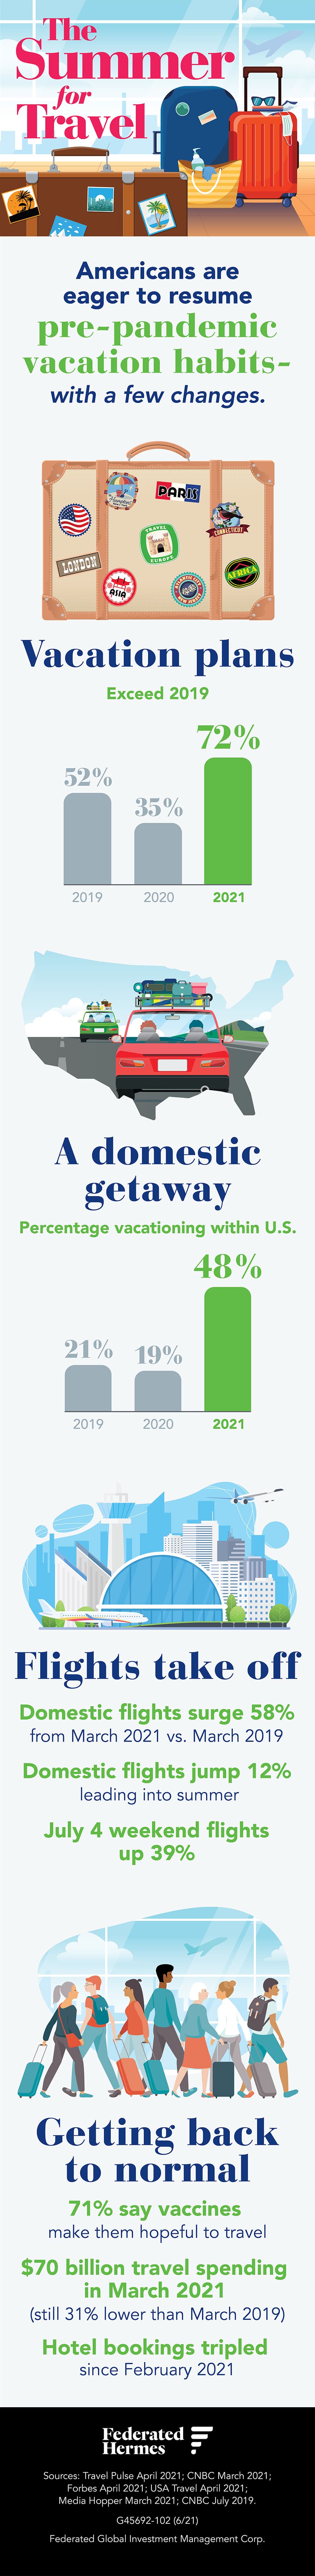 The Summer for Travel alt text Infographic published: June 25, 2021. Title: The Summer for Travel The Summer for Travel. Americans are eager to resume pre-pandemic vacation habits- with a few changes. Vacation plans exceed 2019. 52% in 2019, 35% in 2020, 72% in 2021. A domestic getaway. Percentage vacationing within U.S. 21% in 2019, 19% in 2020, 48% in 2021. Flights take off. Domestic flights surge 58% from March 2021 vs. March 2019. Domestic flights jump 12% leading into summer. July 4 weekend flights up 39%. Getting back to normal. 71% say vaccines make them hopeful to travel. $70 billion travel spending in March 2021 (still 31% lower than March 2019). Hotel bookings tripled since February 2021. Information sources for this graphic include: Travel Pulse April 2021; CNBC March 2021; Forbes April 2021; USA Travel April 2021; Media Hopper March 2021; CNBC July 2019. 